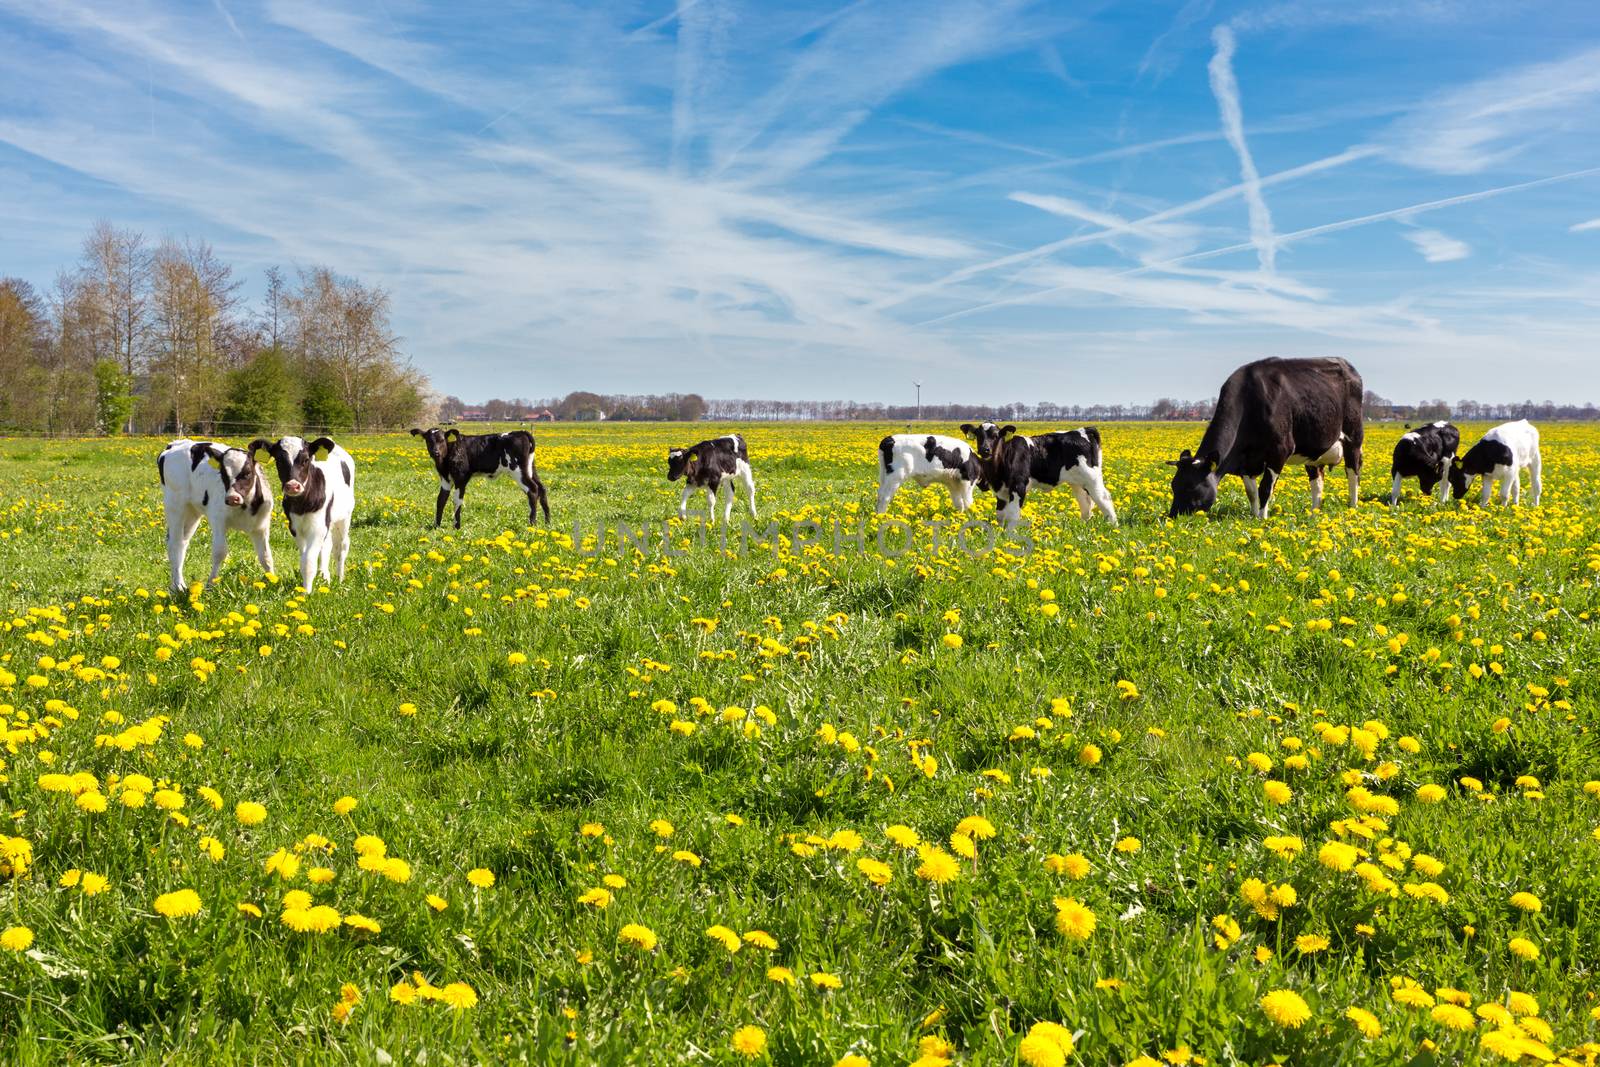 Mother cow with newborn calves in meadow with yellow dandelions by BenSchonewille